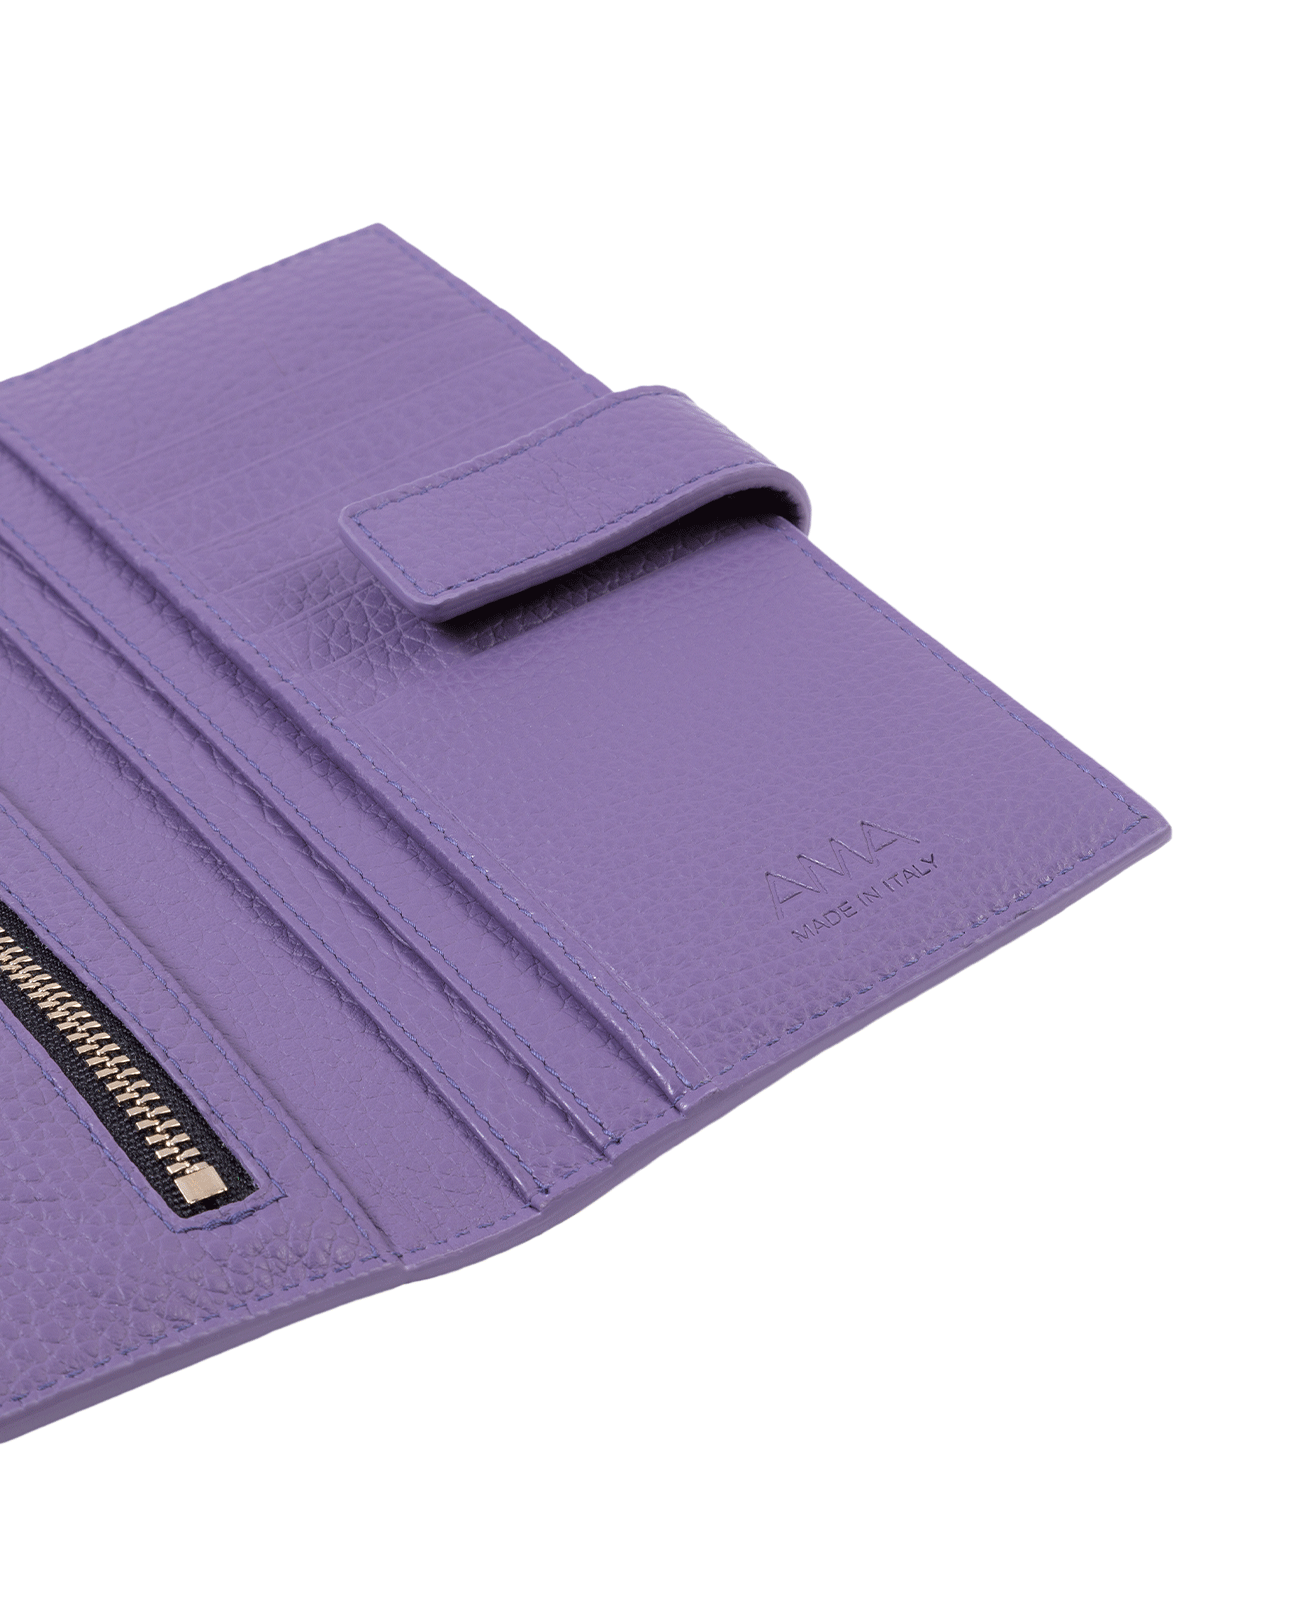 Wallet in Italian full-grain leather. Designed to carry your personal items. Available in a variety of styles and designs. Color: Purple. Size: Medium